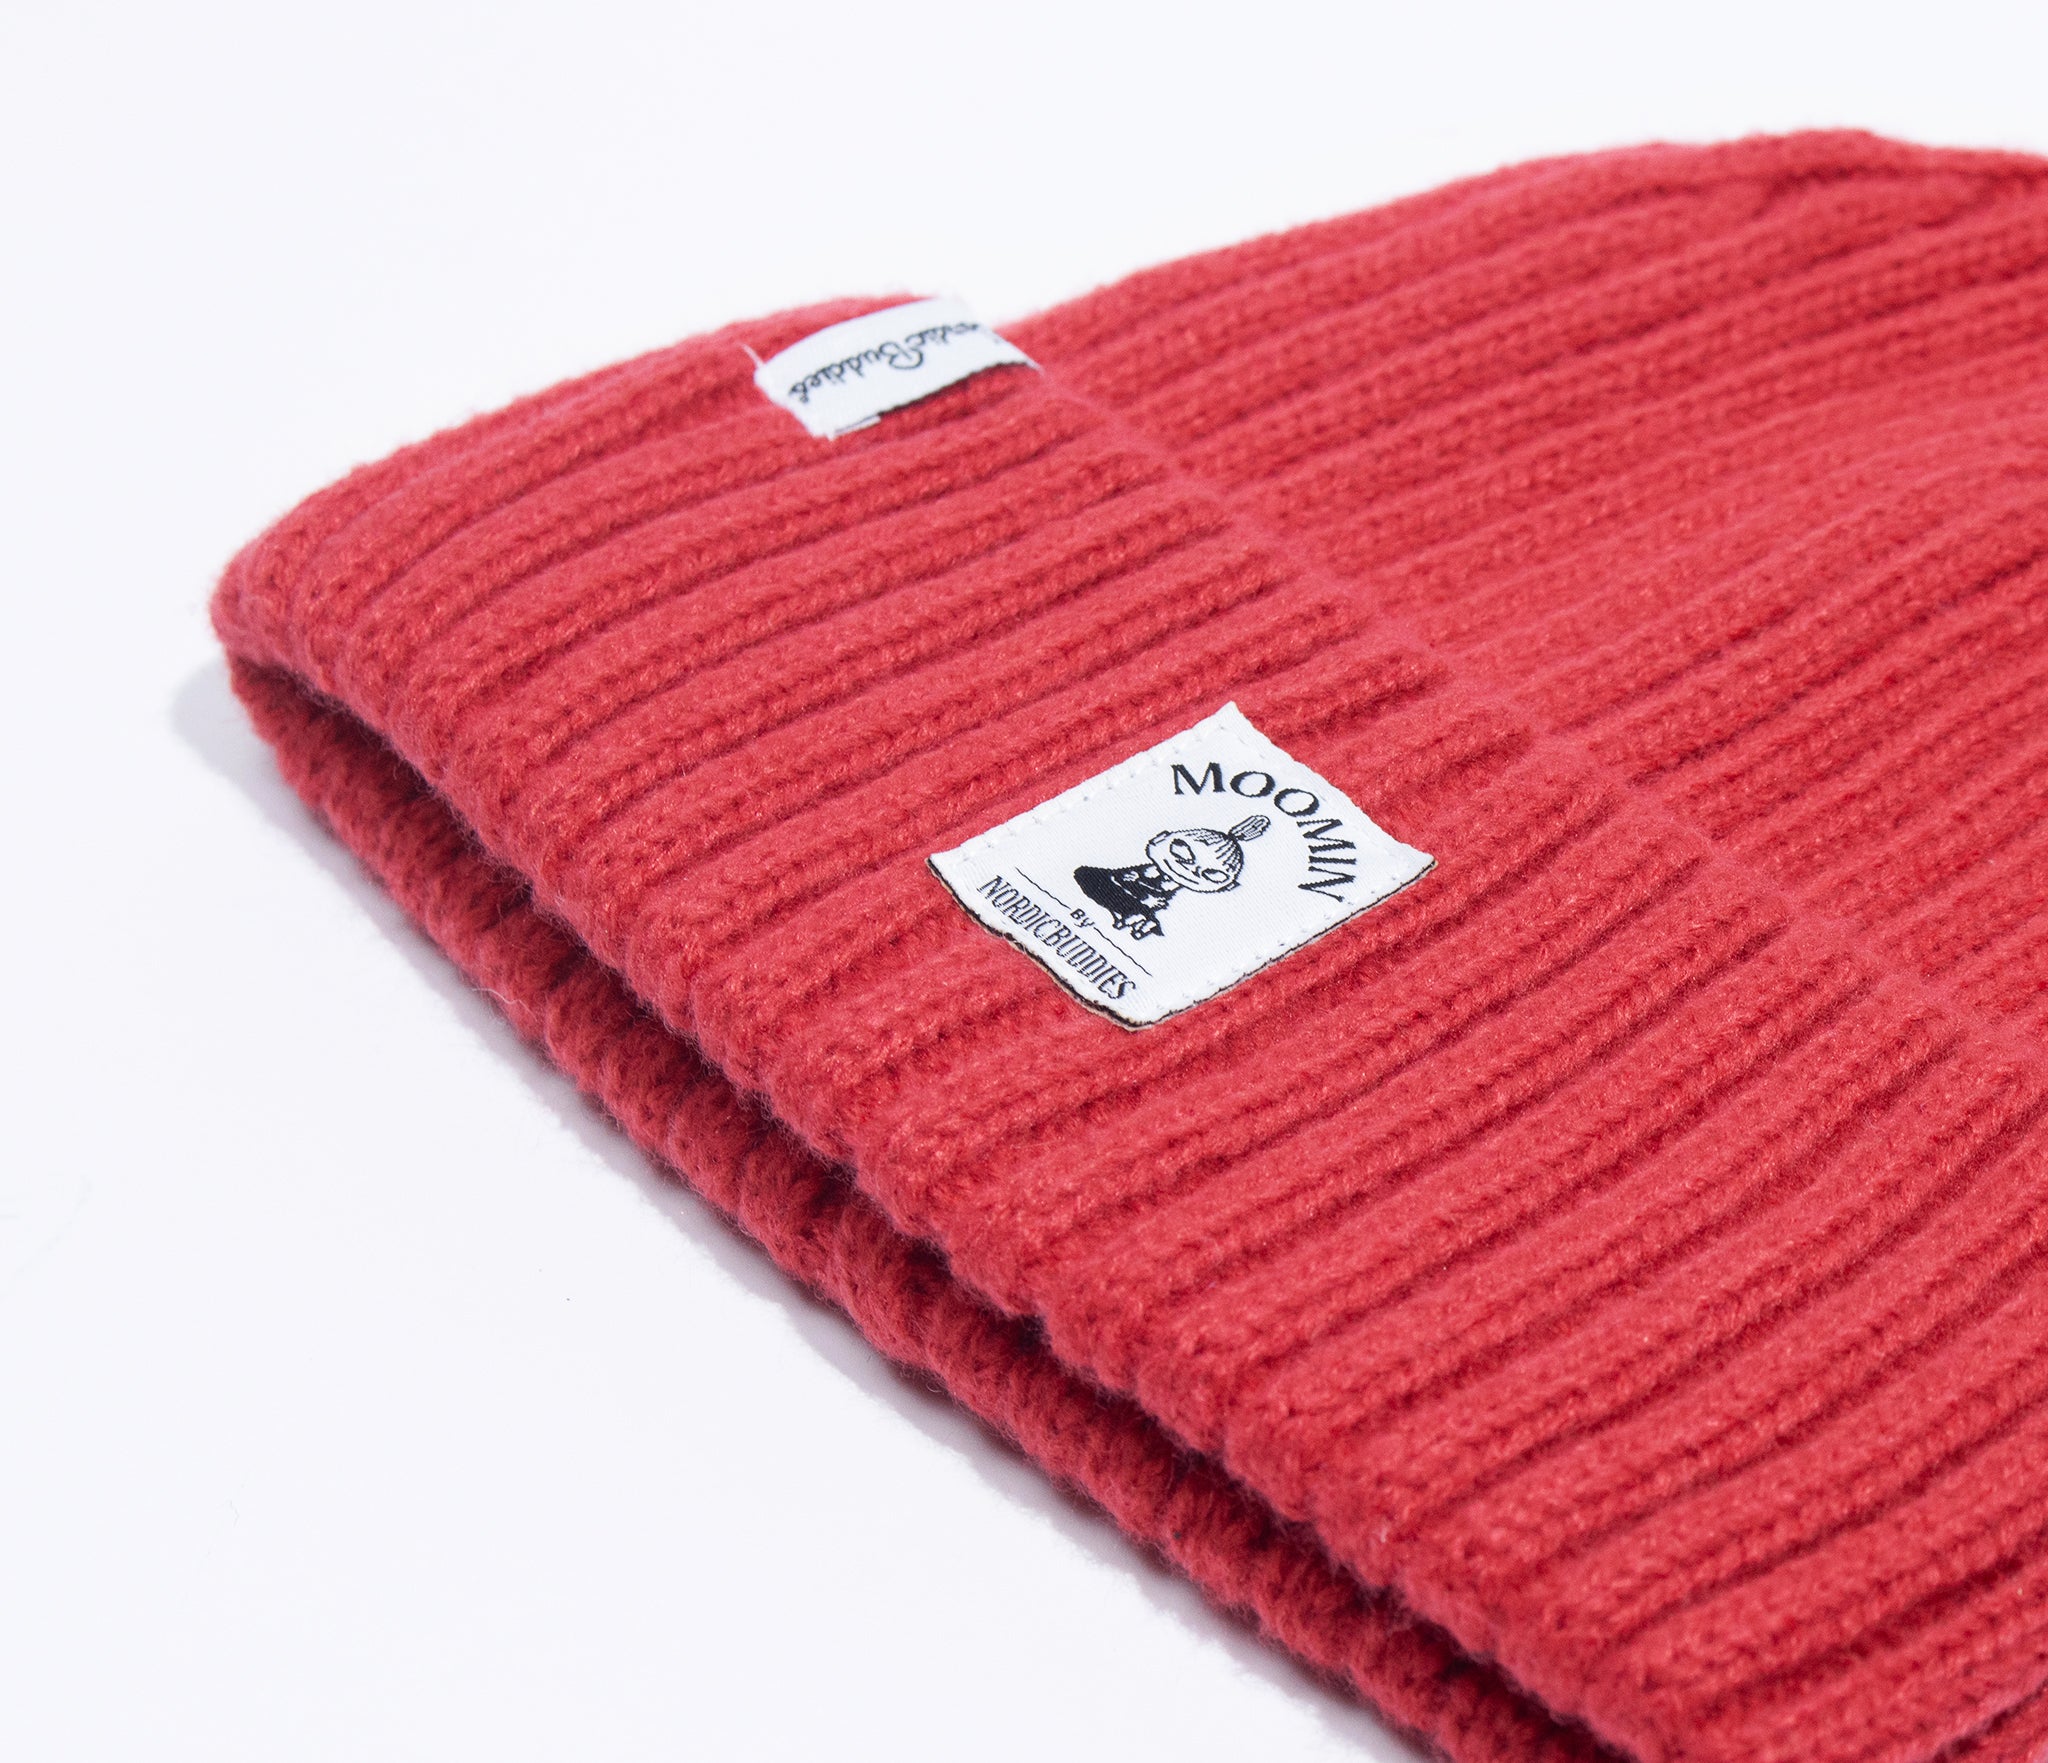 Little My Winter Hat Beanie Adult - Red